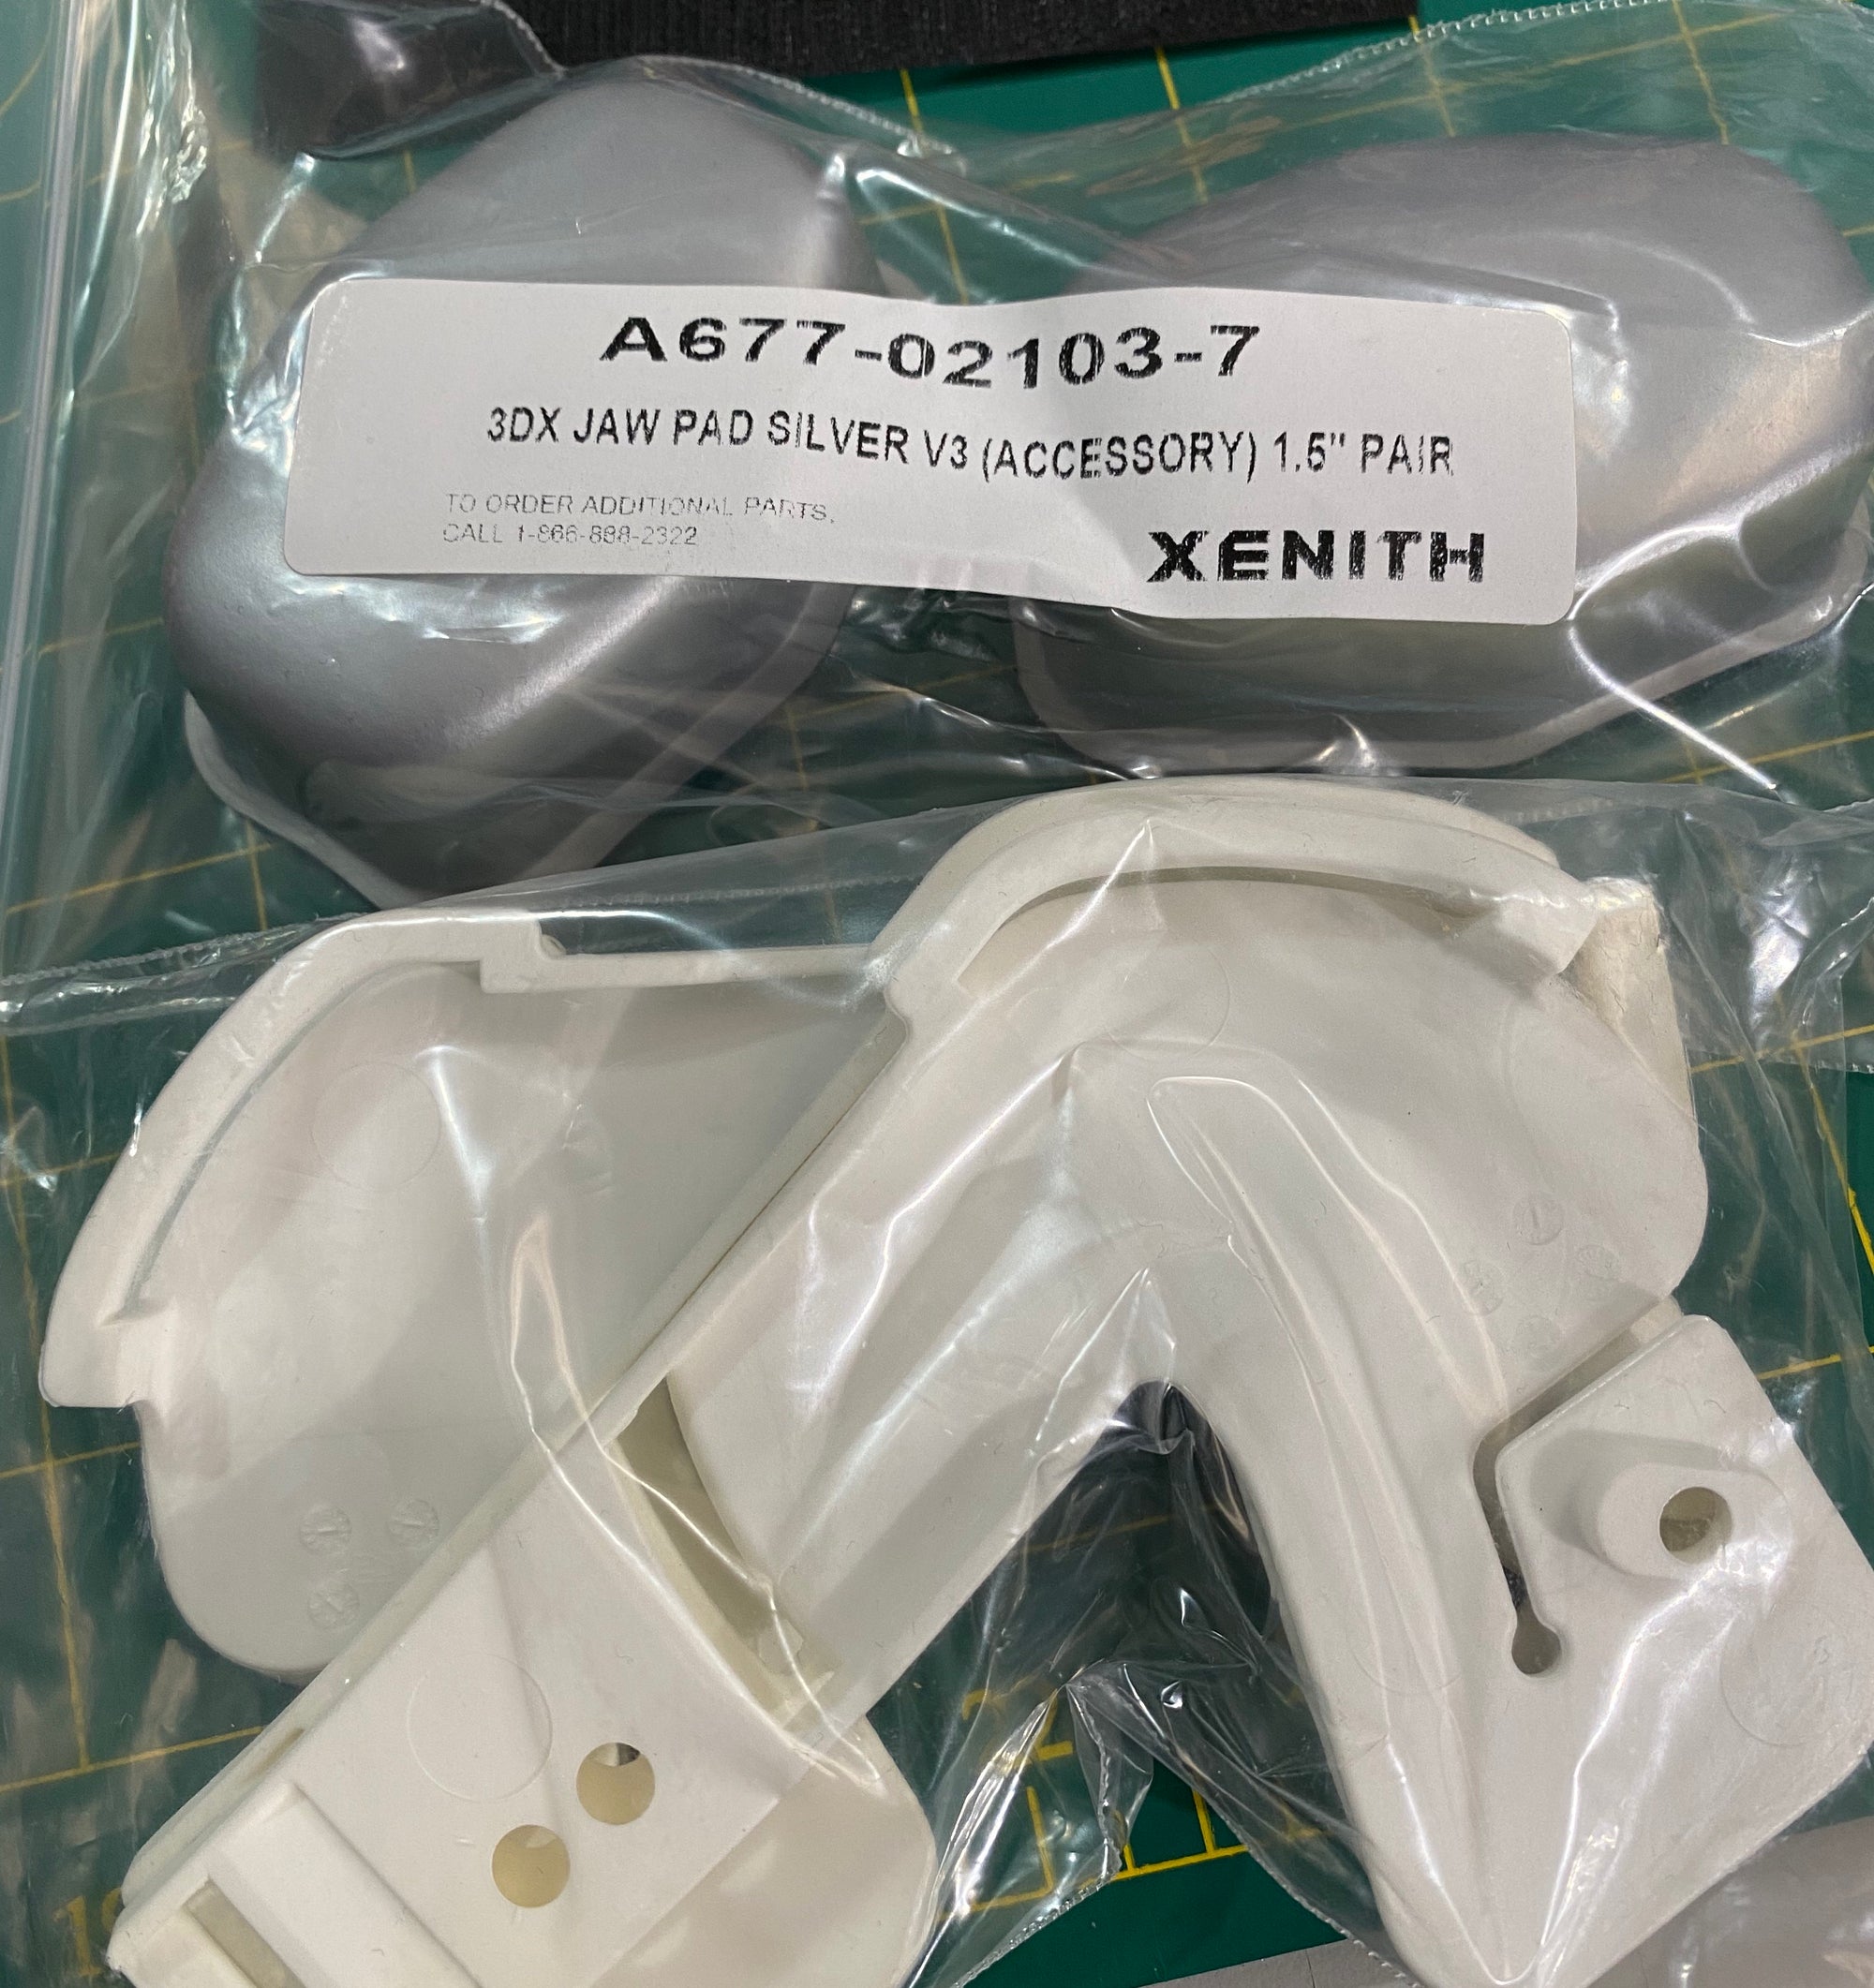 Xenith X2 Jaw Pad Upgrade Back Plates